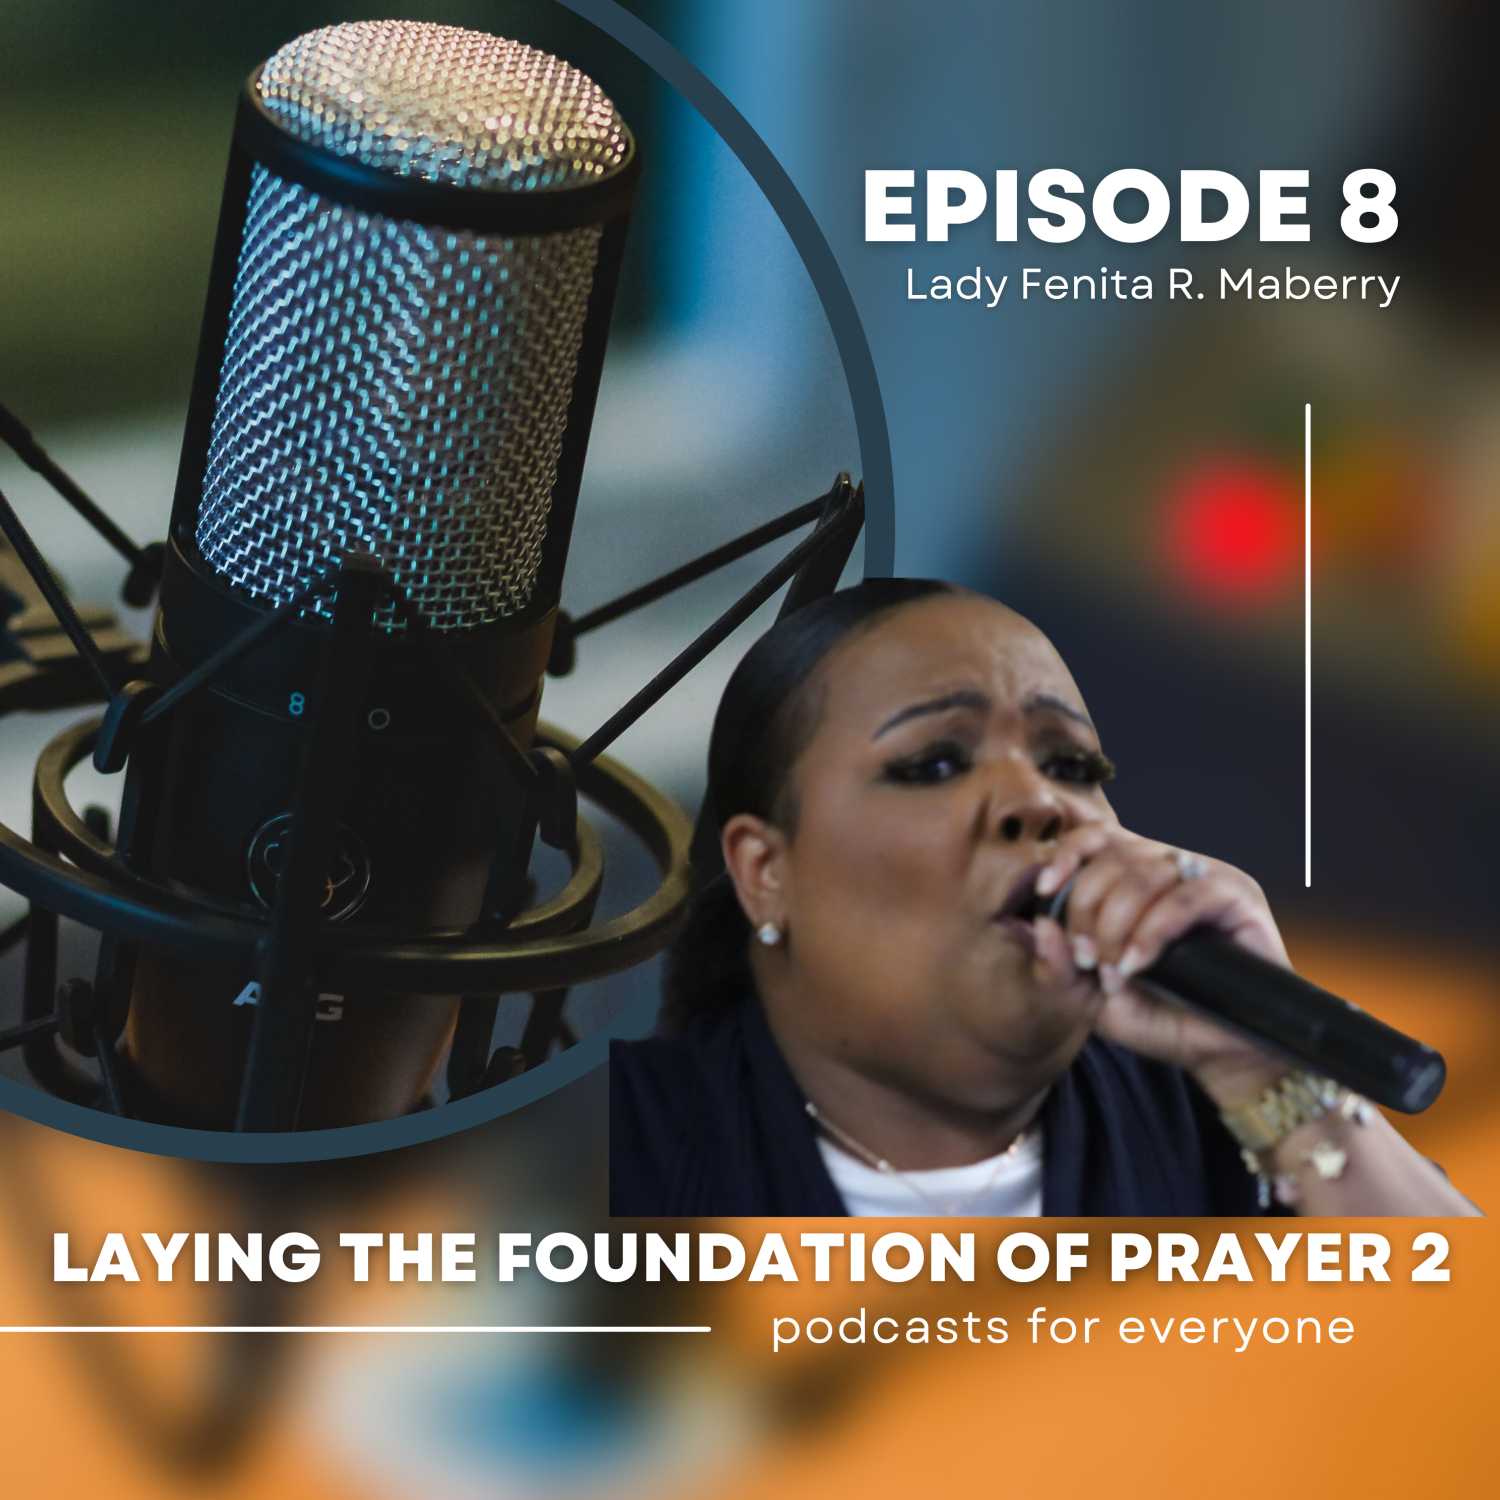 Laying the Foundation of Prayer 2: Episode 8